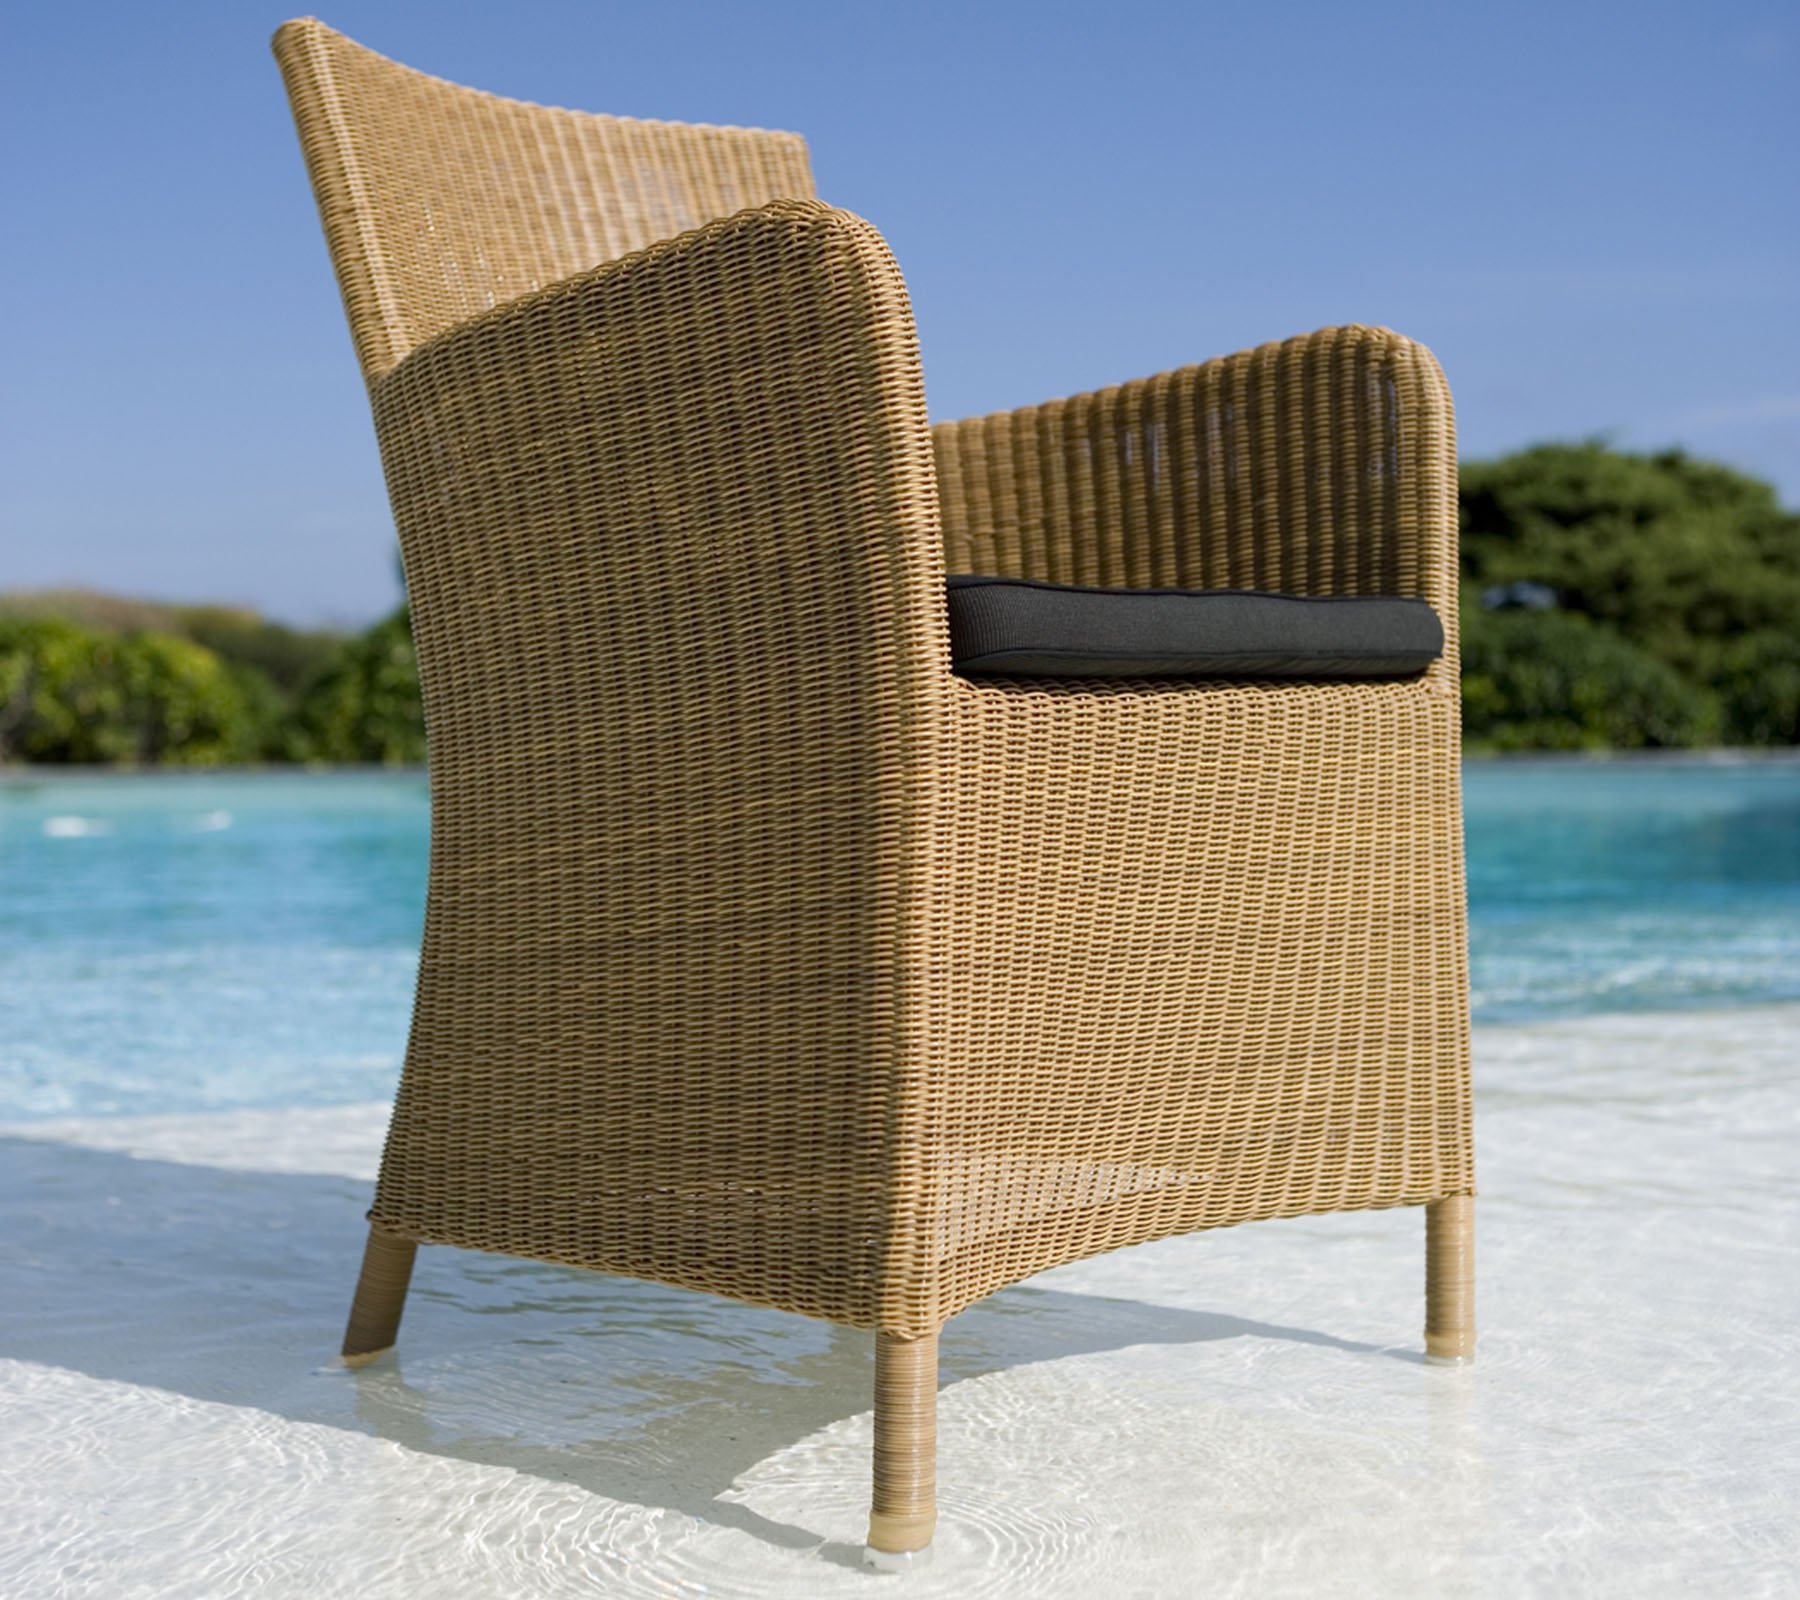 Hampsted Chair from Cane-line, designed by Cane-line Design Team